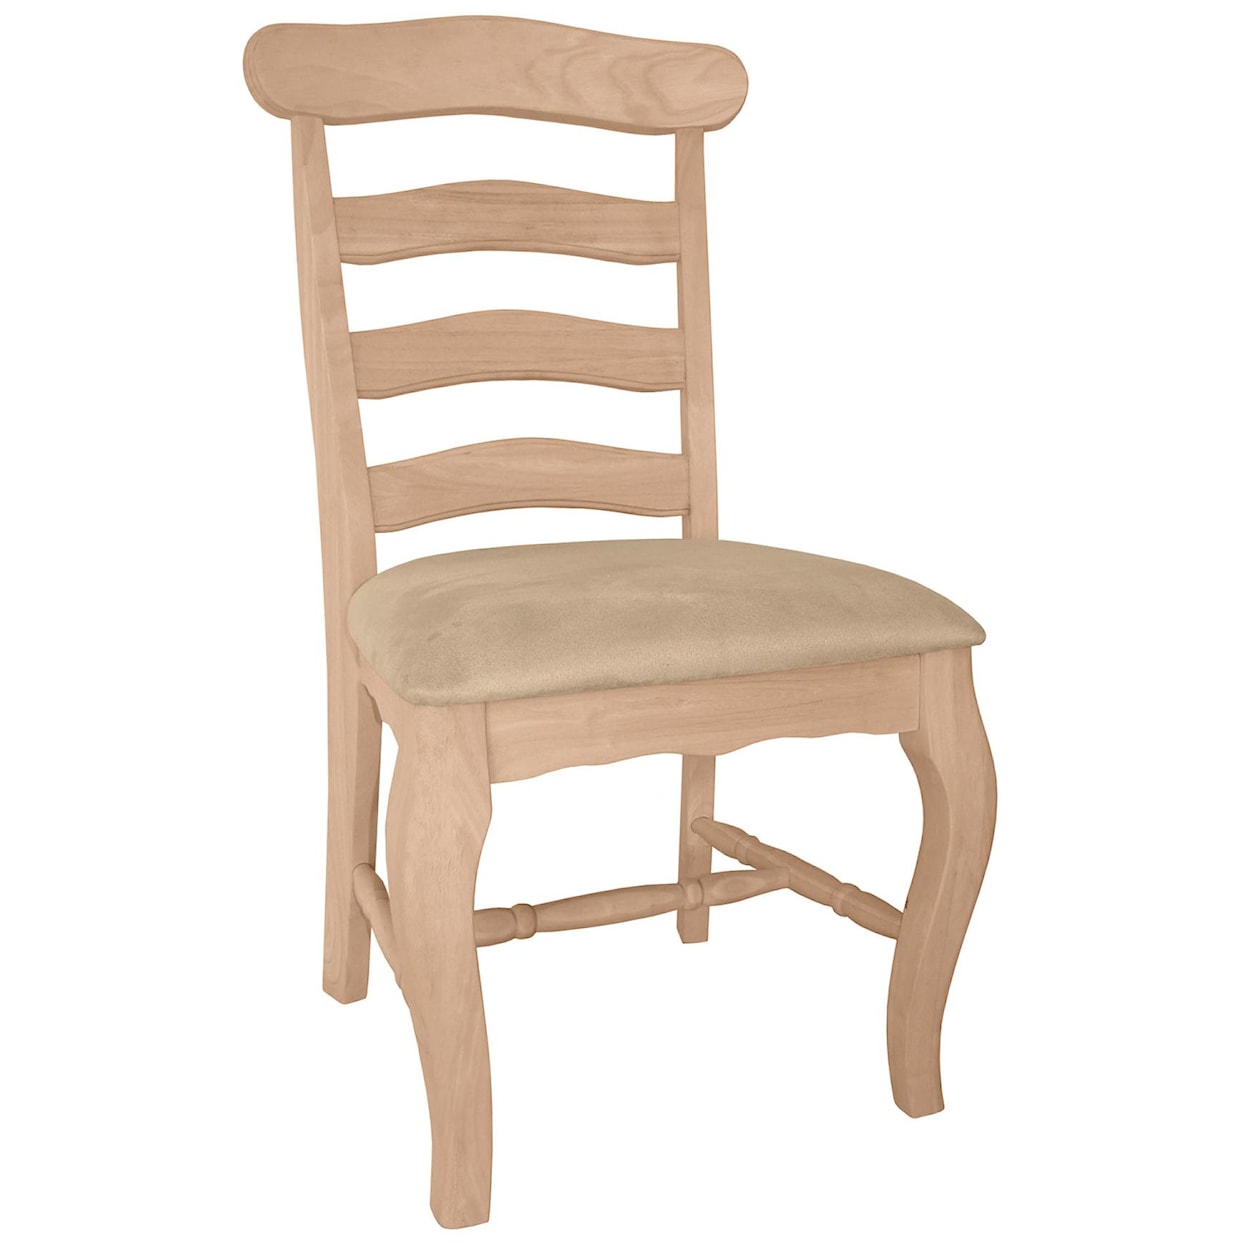 John Thomas SELECT Dining Room Country French Chair with Seat Cushion